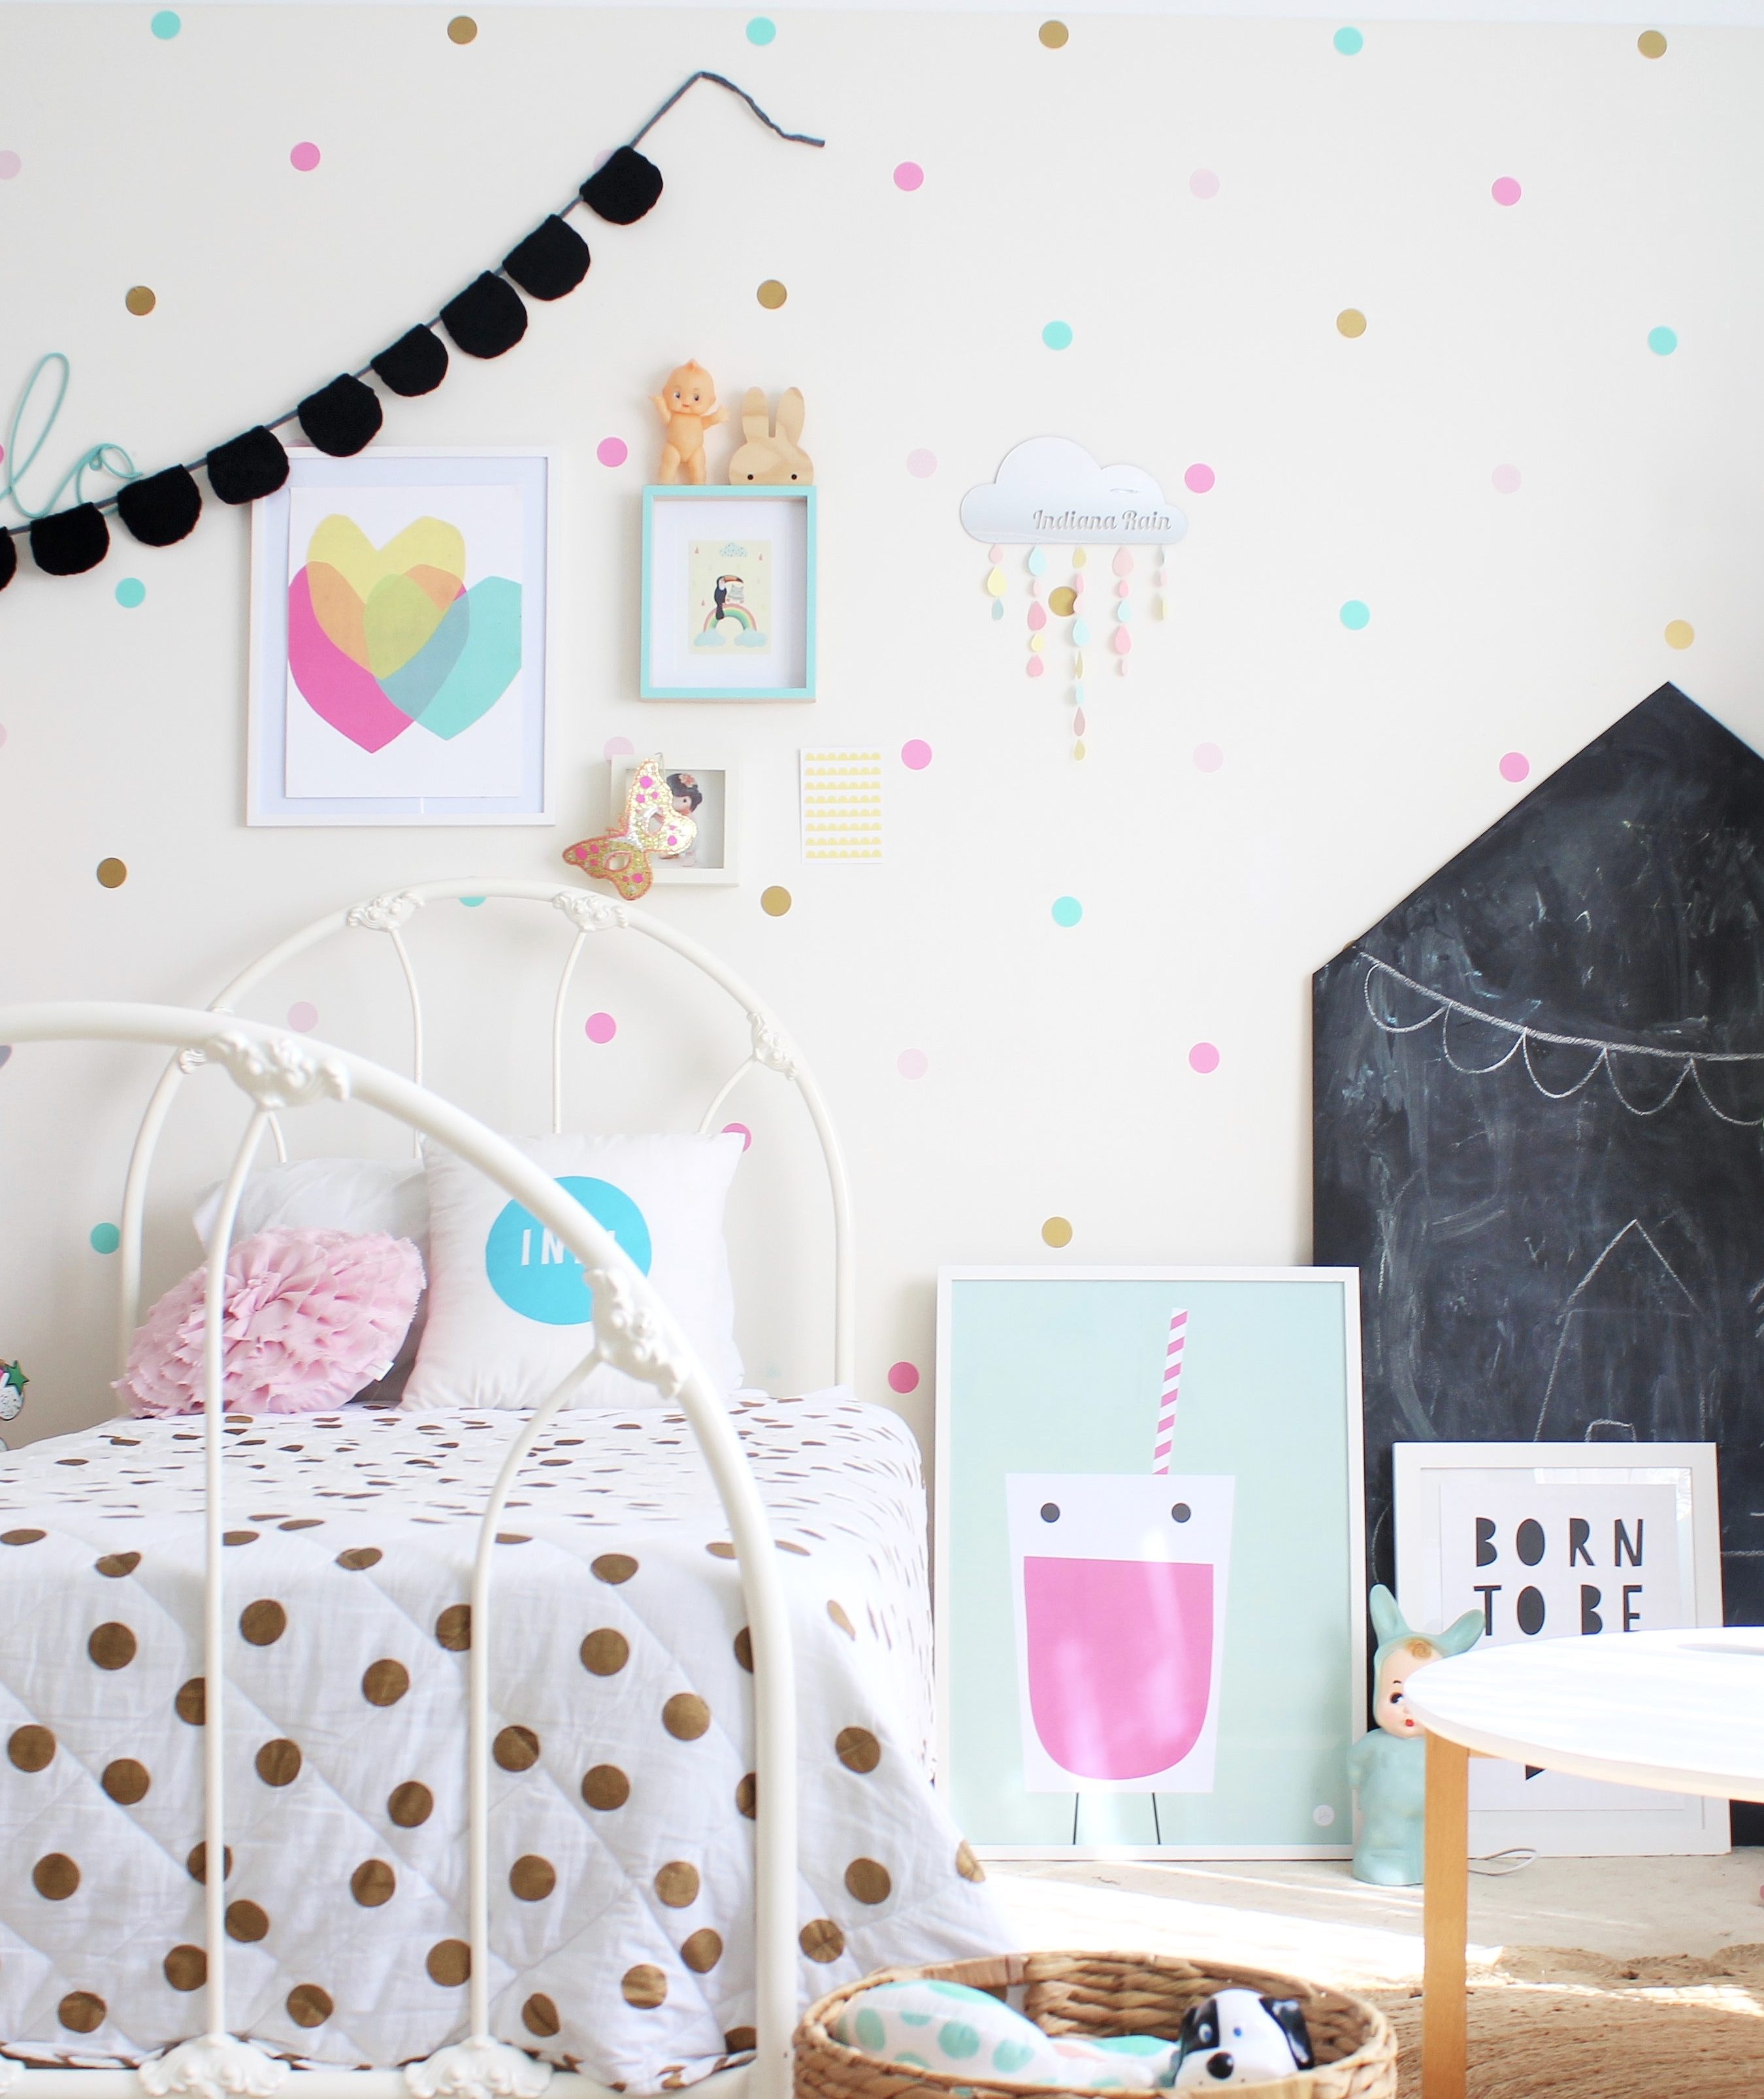 How to Make a DIY Wall-Size Chalkboard – Treehouse Schoolhouse